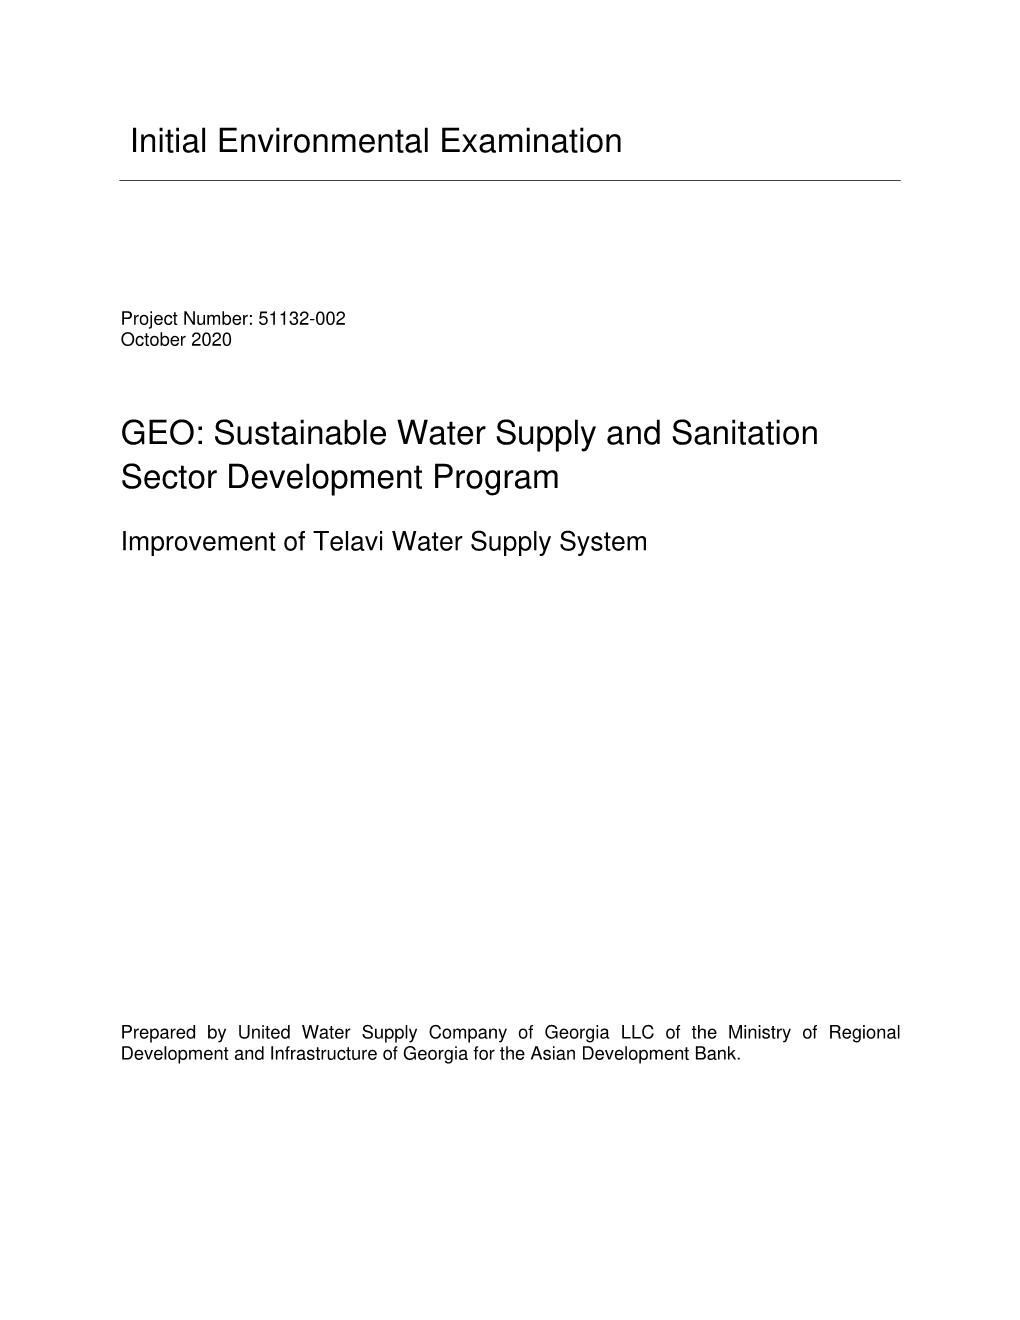 51132-002: Sustainable Water Supply And